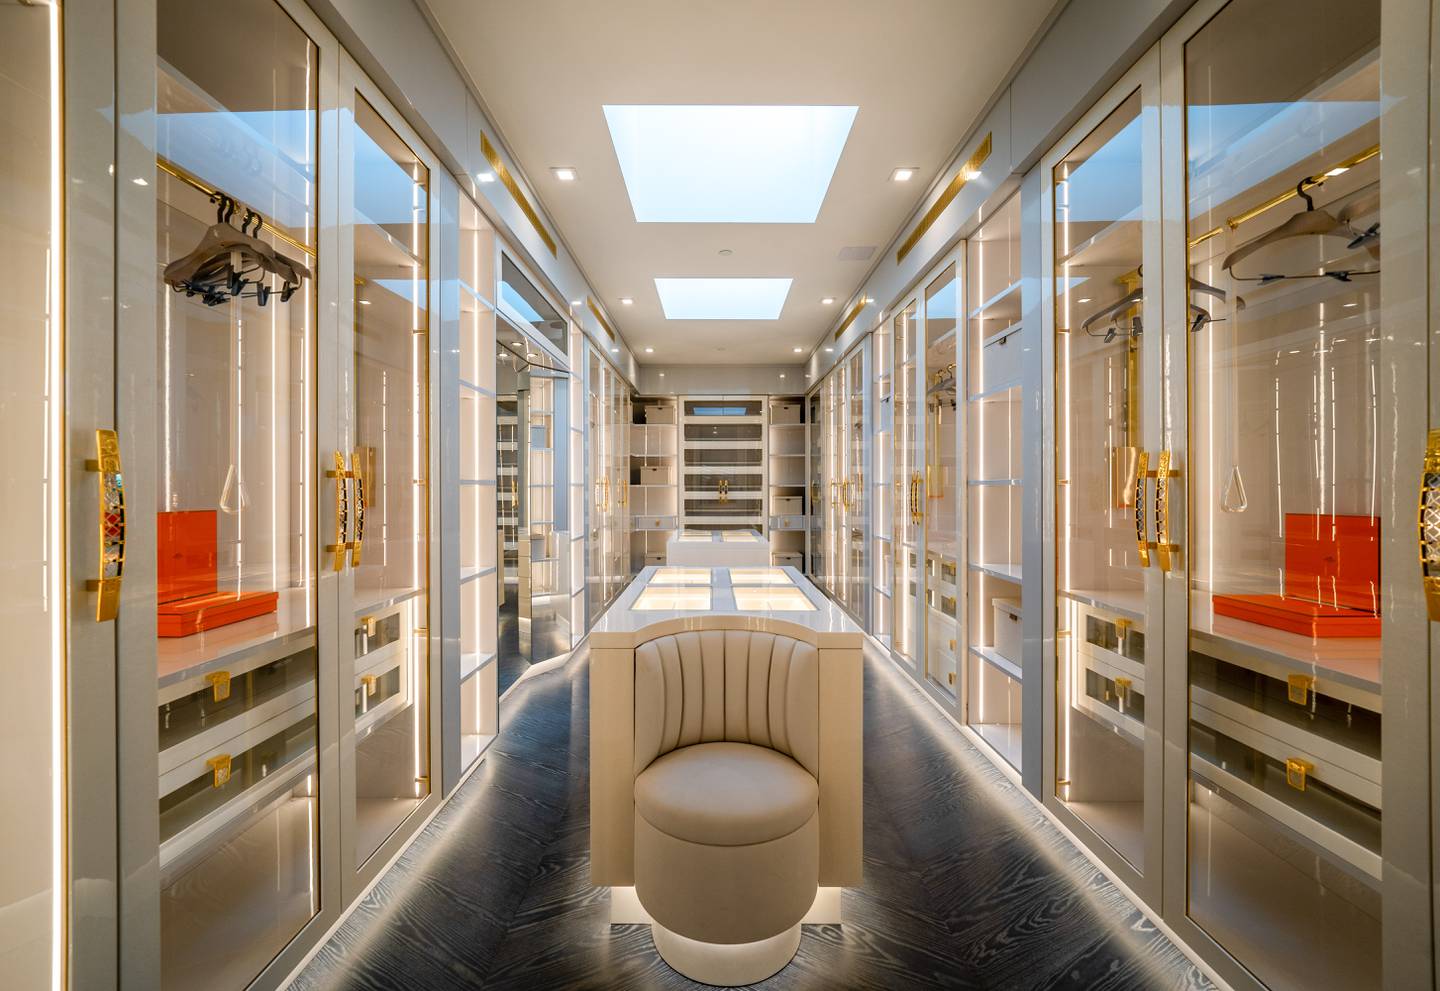 The walk-in wardrobe is the size of a boutique. Photo: Savills